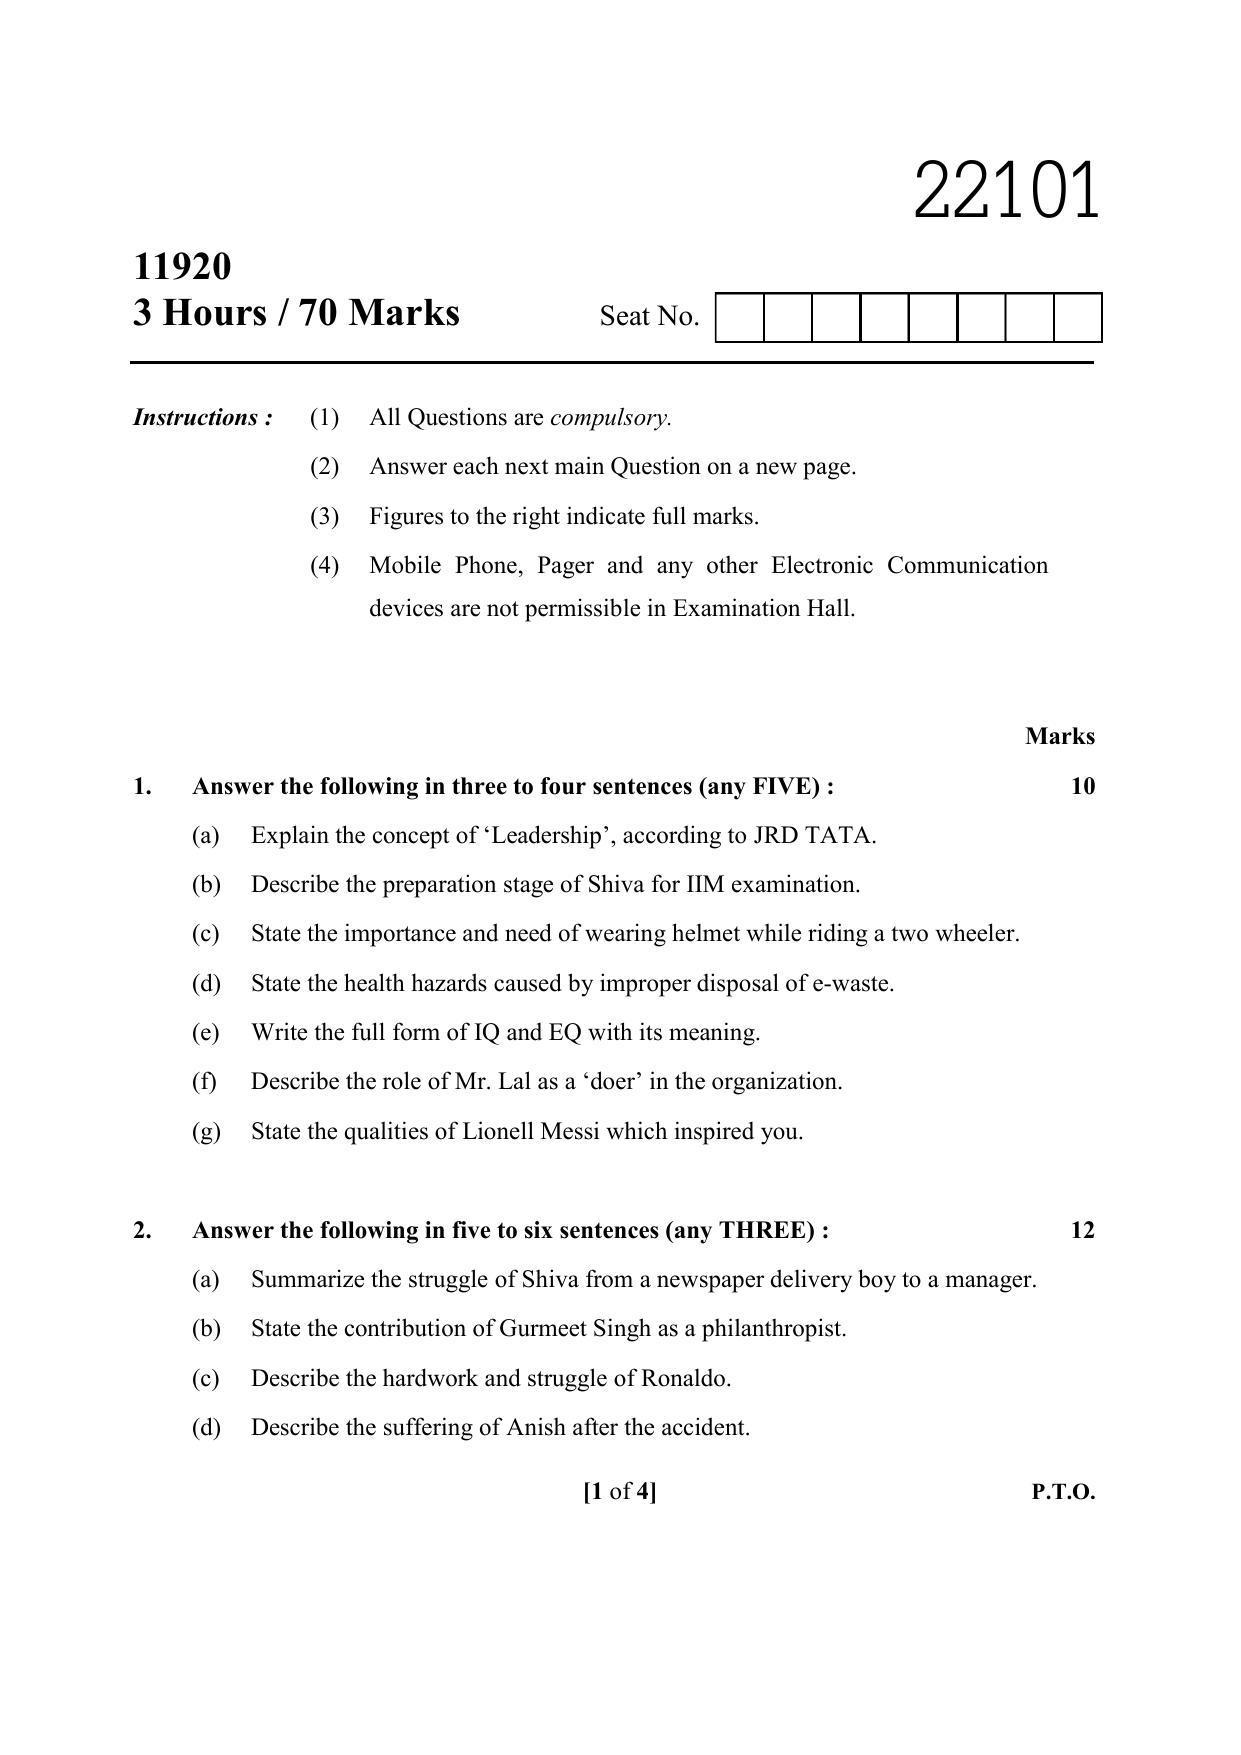 MSBTE Question Paper - 2019 - English - Page 1